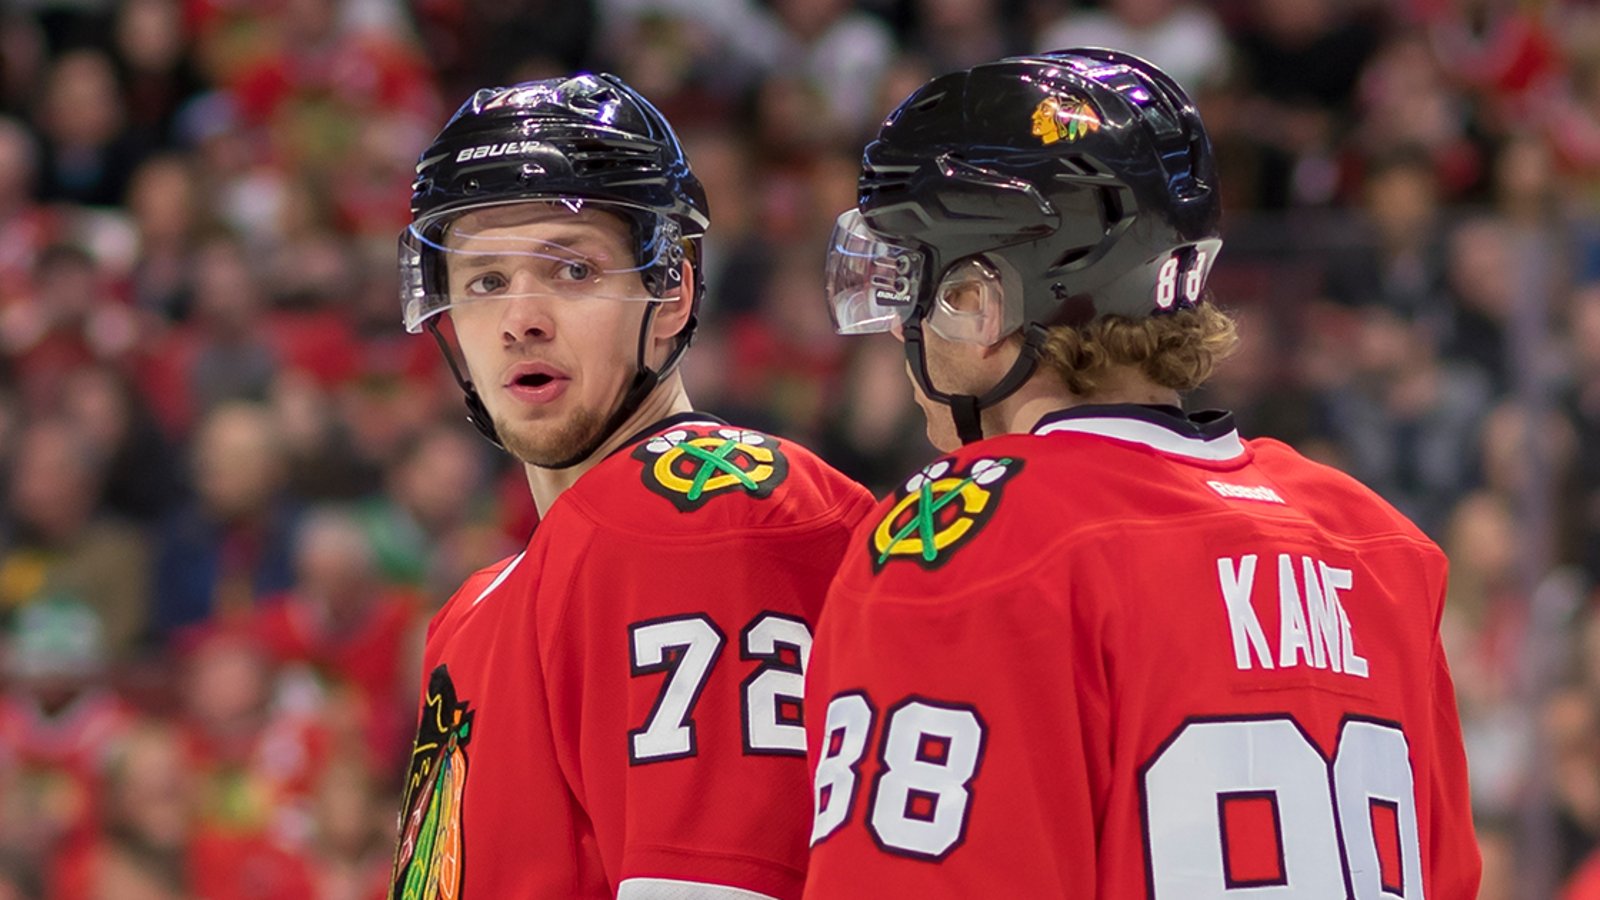 Kane openly petitions for Panarin to return to Chicago